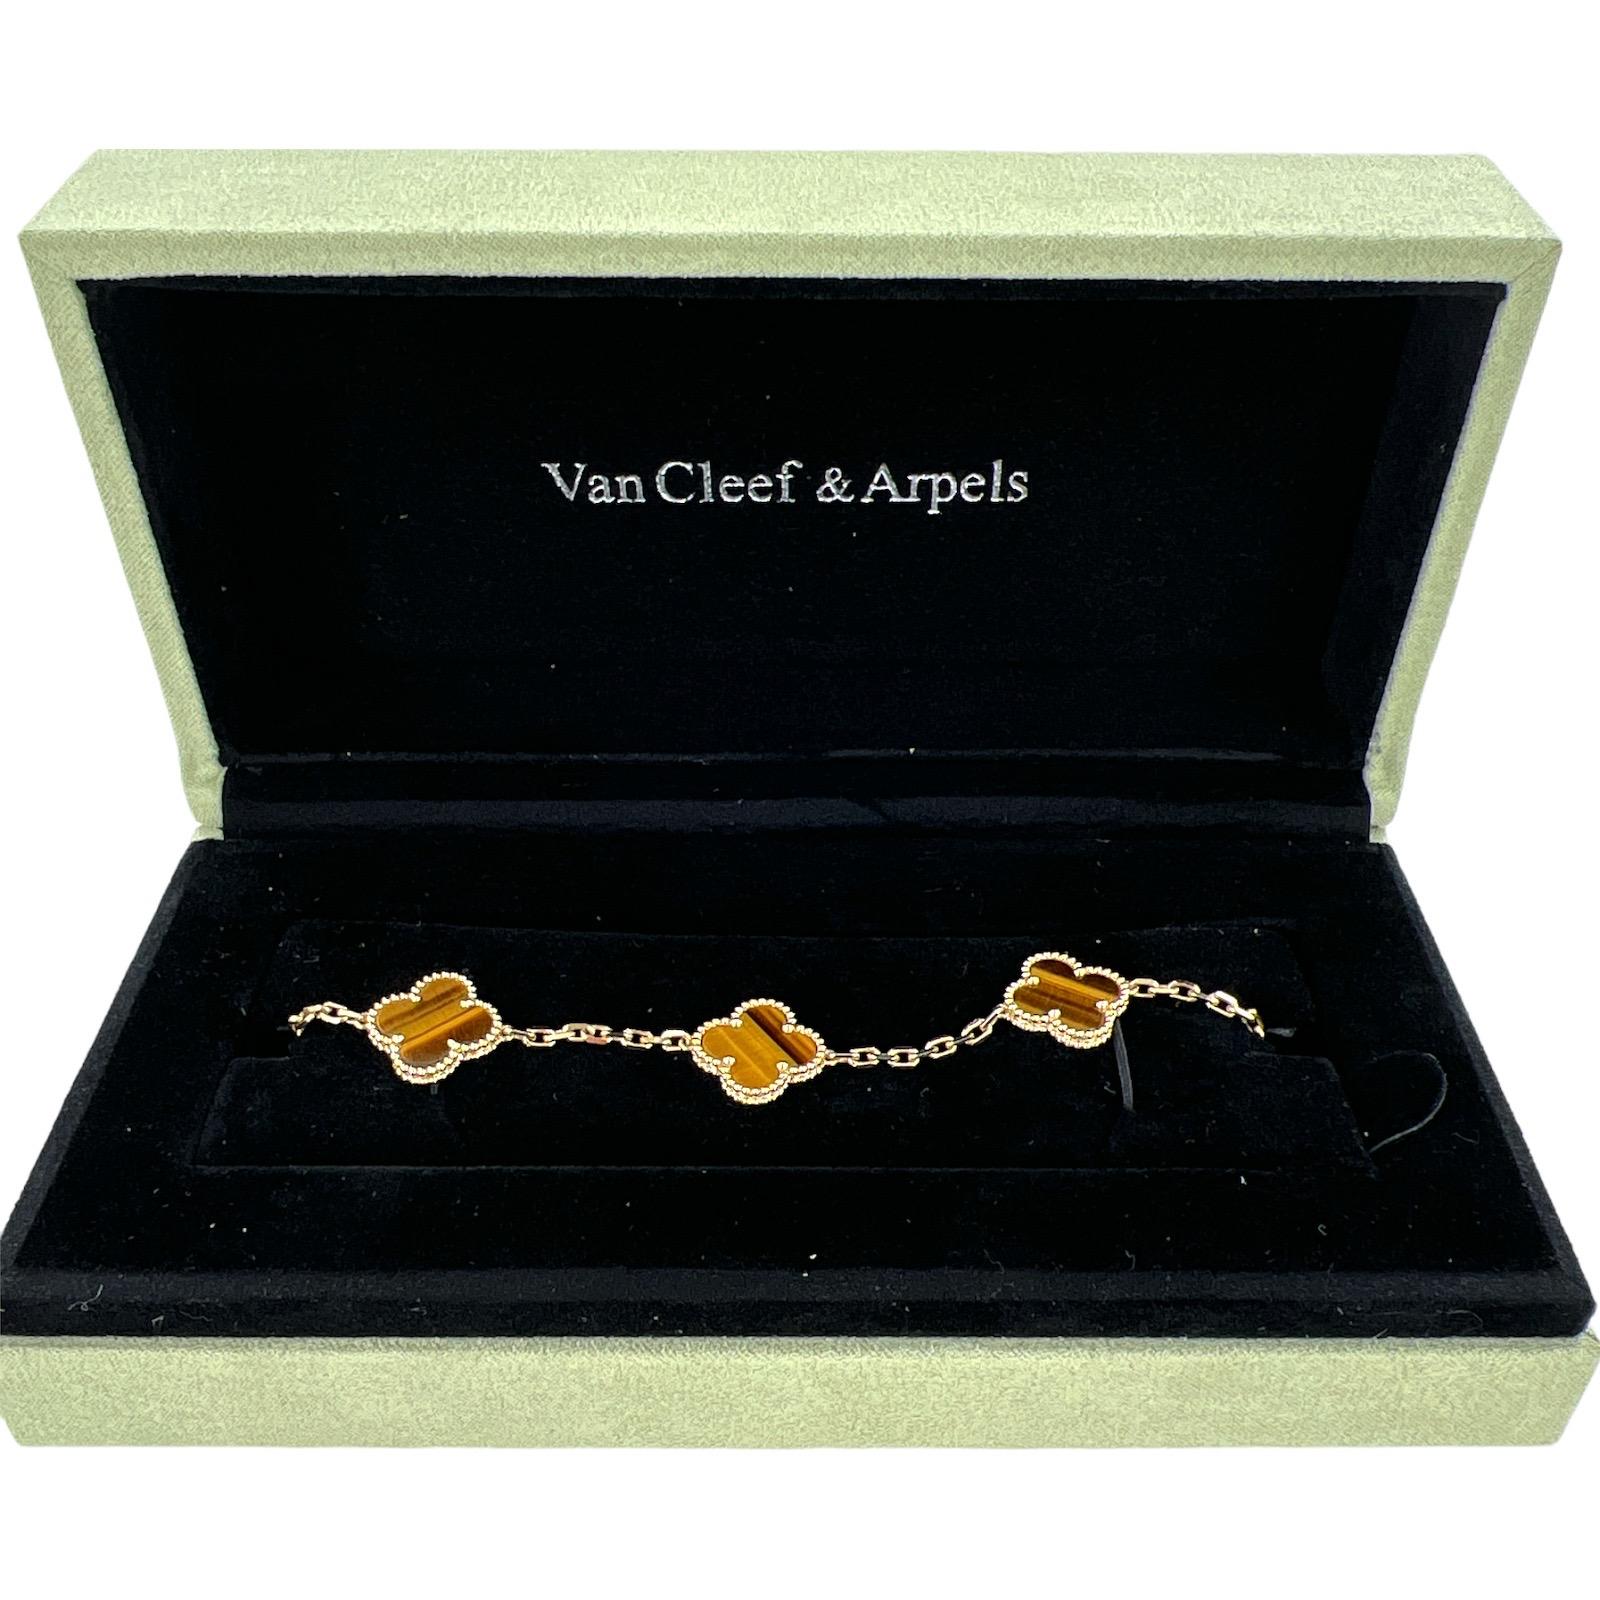 Authentic Van Cleef & Arpels Vintage Alhambra Tiger's Eye bracelet fashioned in 18 karat yellow gold. The 5 motif bracelet was originally purchased in 2015. The bracelet measures 7 inches in length and is signed, numbered, and hallmarked. Original